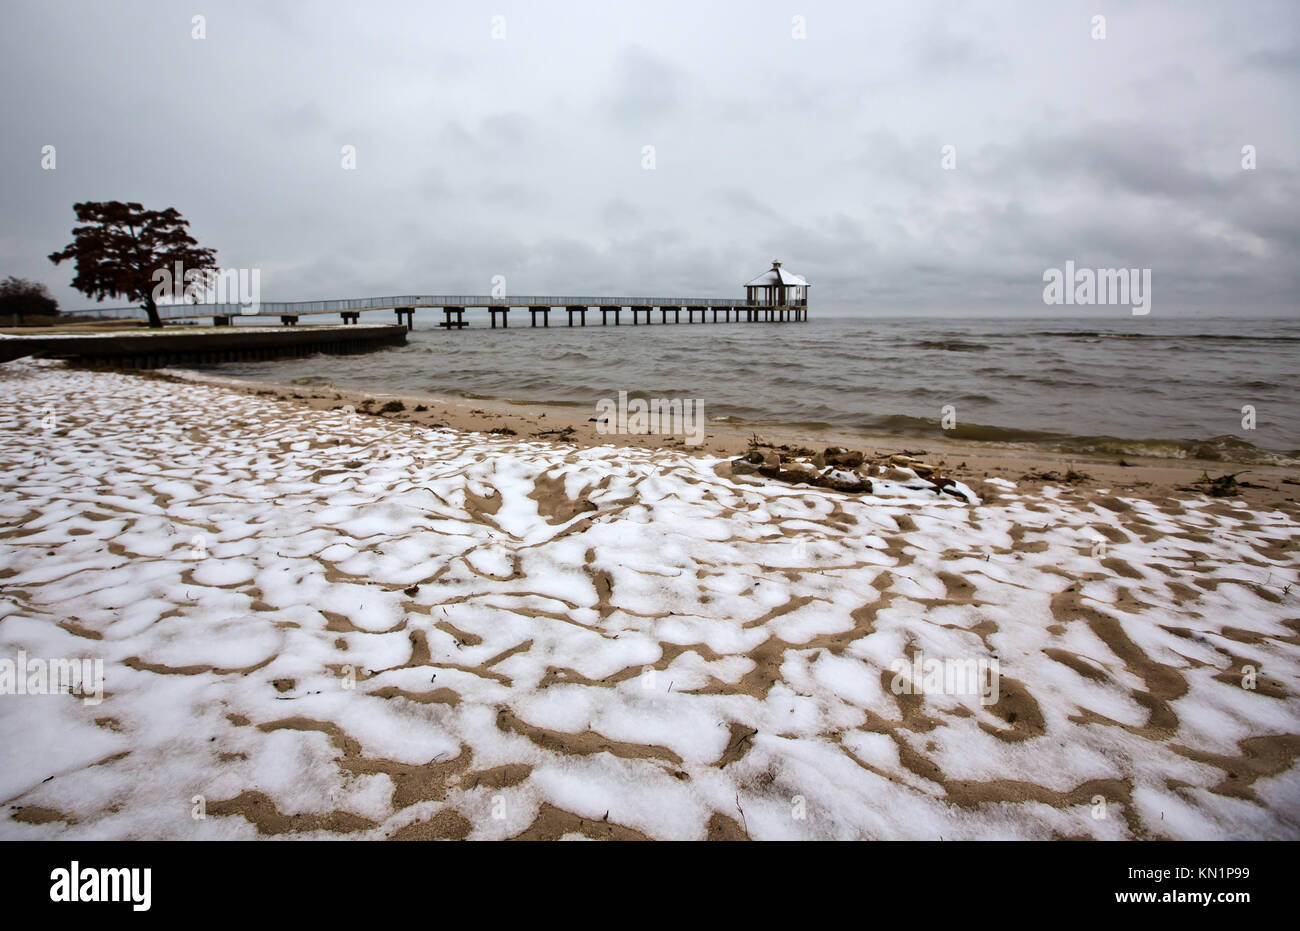 Mandeville, Louisiana, USA. 8th Dec, 2017. SNOW FALLS IN SOUTHERN LOUISIANA and coats the shore of Lake Pontchartrain in Fontainebleau State Park on Dec. 8, 2017. A wintry mix of precipitation fell across several Deep South states causing many businesses and schools to shut down. Credit: Julie Dermansky/ZUMA Wire/Alamy Live News Stock Photo